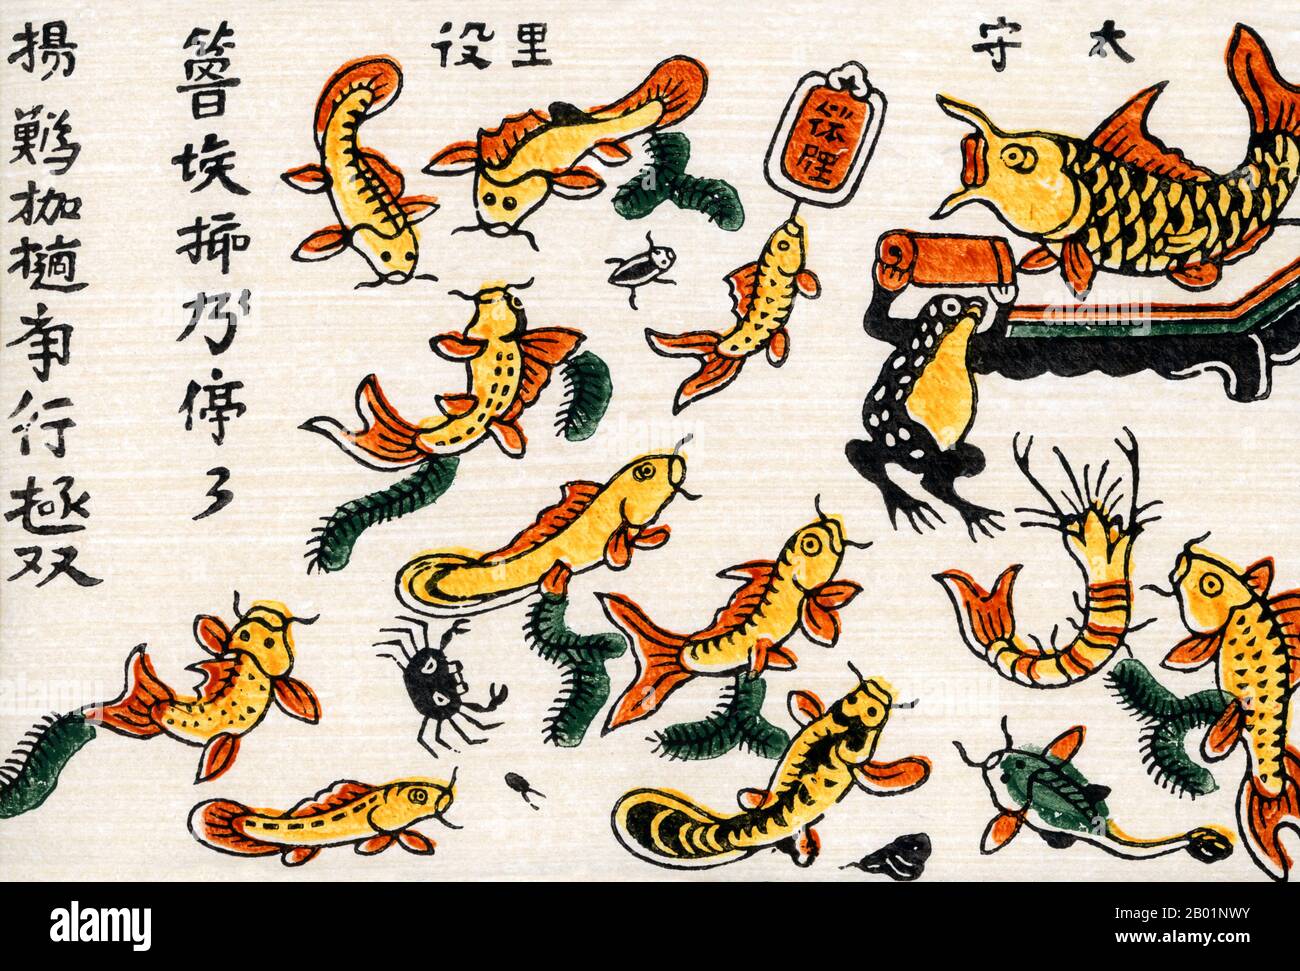 Vietnam: A traditional woodblock painting of Vietnamese fish paying tribute to the big fish (China), from Dong Ho village, Bac Ninh Province, 20th century.  Dong Ho painting (Vietnamese: Tranh Đông Hồ or Tranh làng Hồ), full name Dong Ho folk woodcut painting (Tranh khắc gỗ dân gian Đông Hồ) is a genre of Vietnamese woodcut paintings originating from Dong Ho village (làng Đông Hồ) in Bac Ninh Province, Vietnam.  Using the traditional điệp paper and colours derived from nature, craftsmen print Dong Ho pictures of different themes from good luck wishes, historical figures to everyday activities. Stock Photo